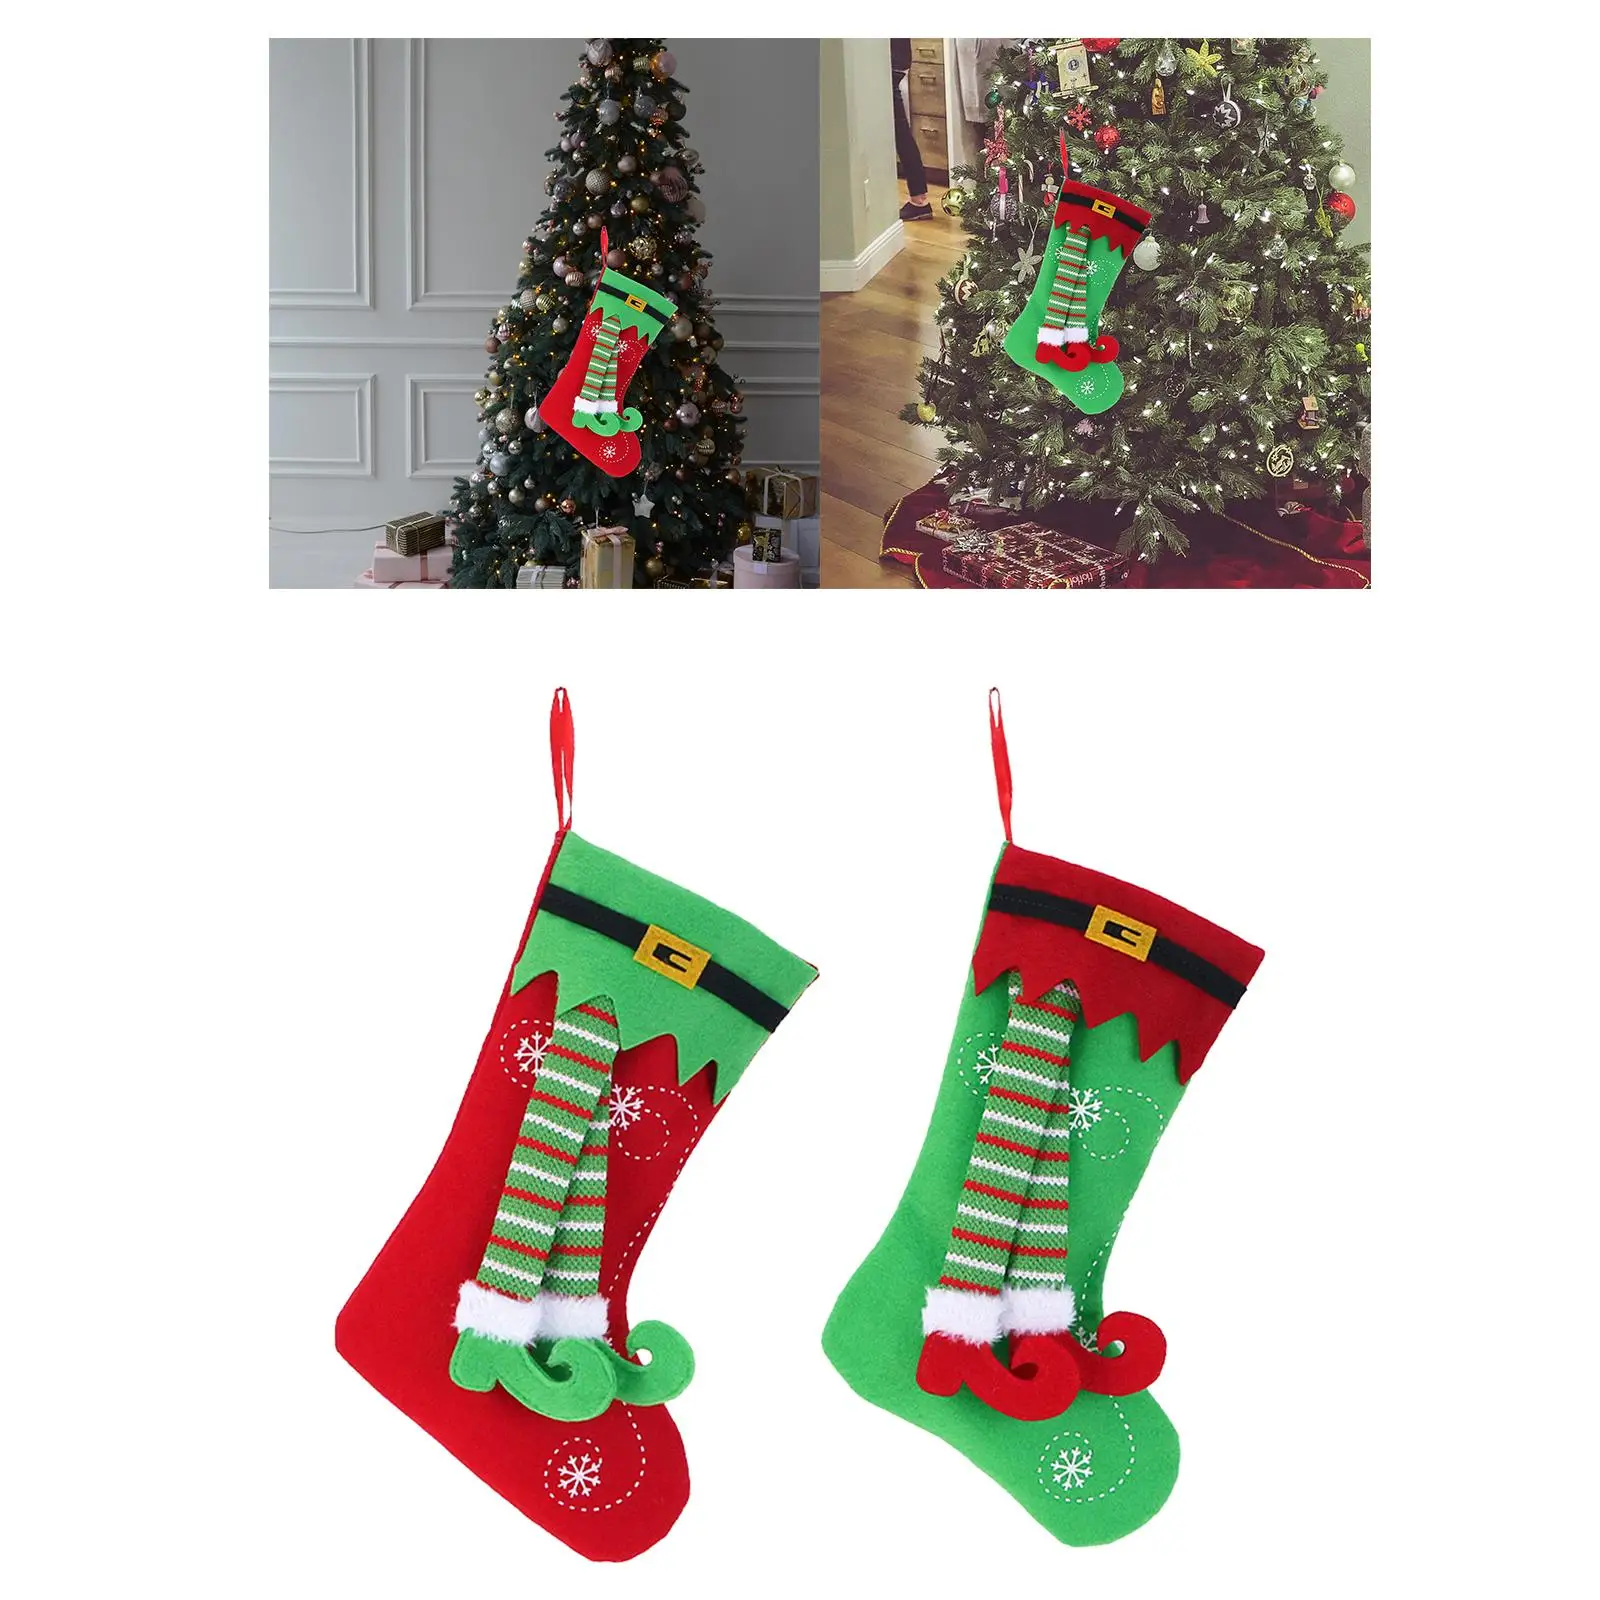 Rustic Christmas Decorative Stocking for Office Holiday Indoor Festival